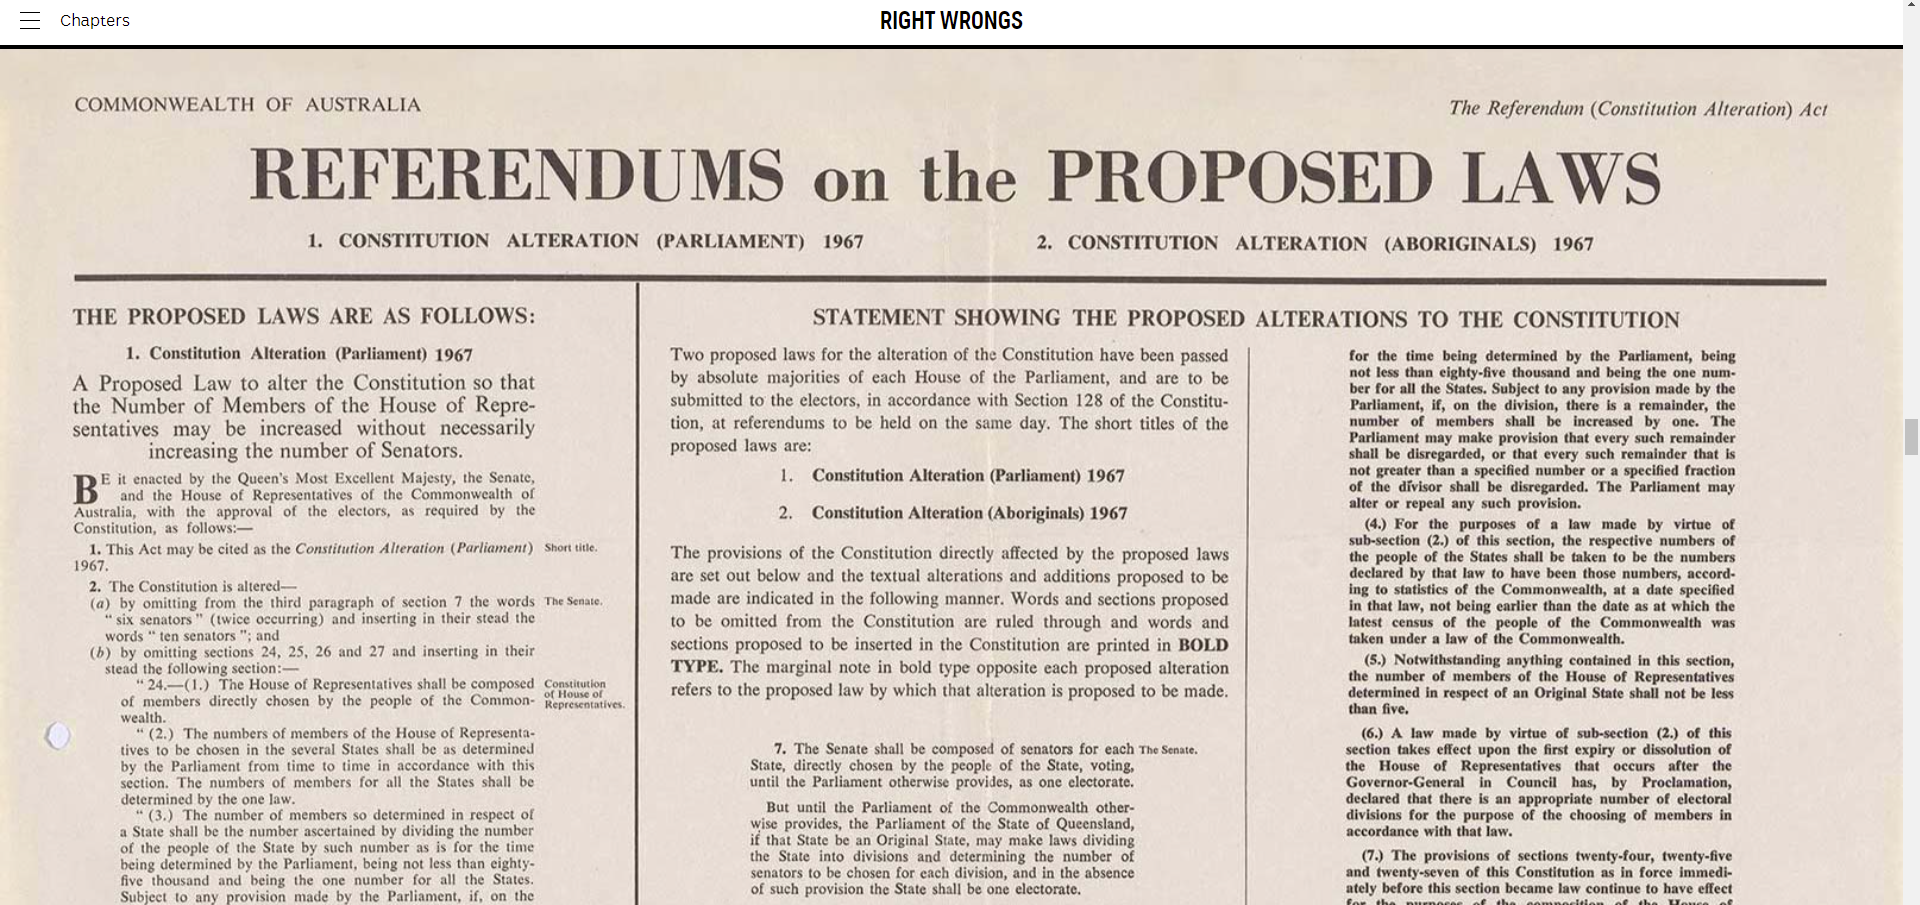 Right Wrongs: The 1967 Referendum